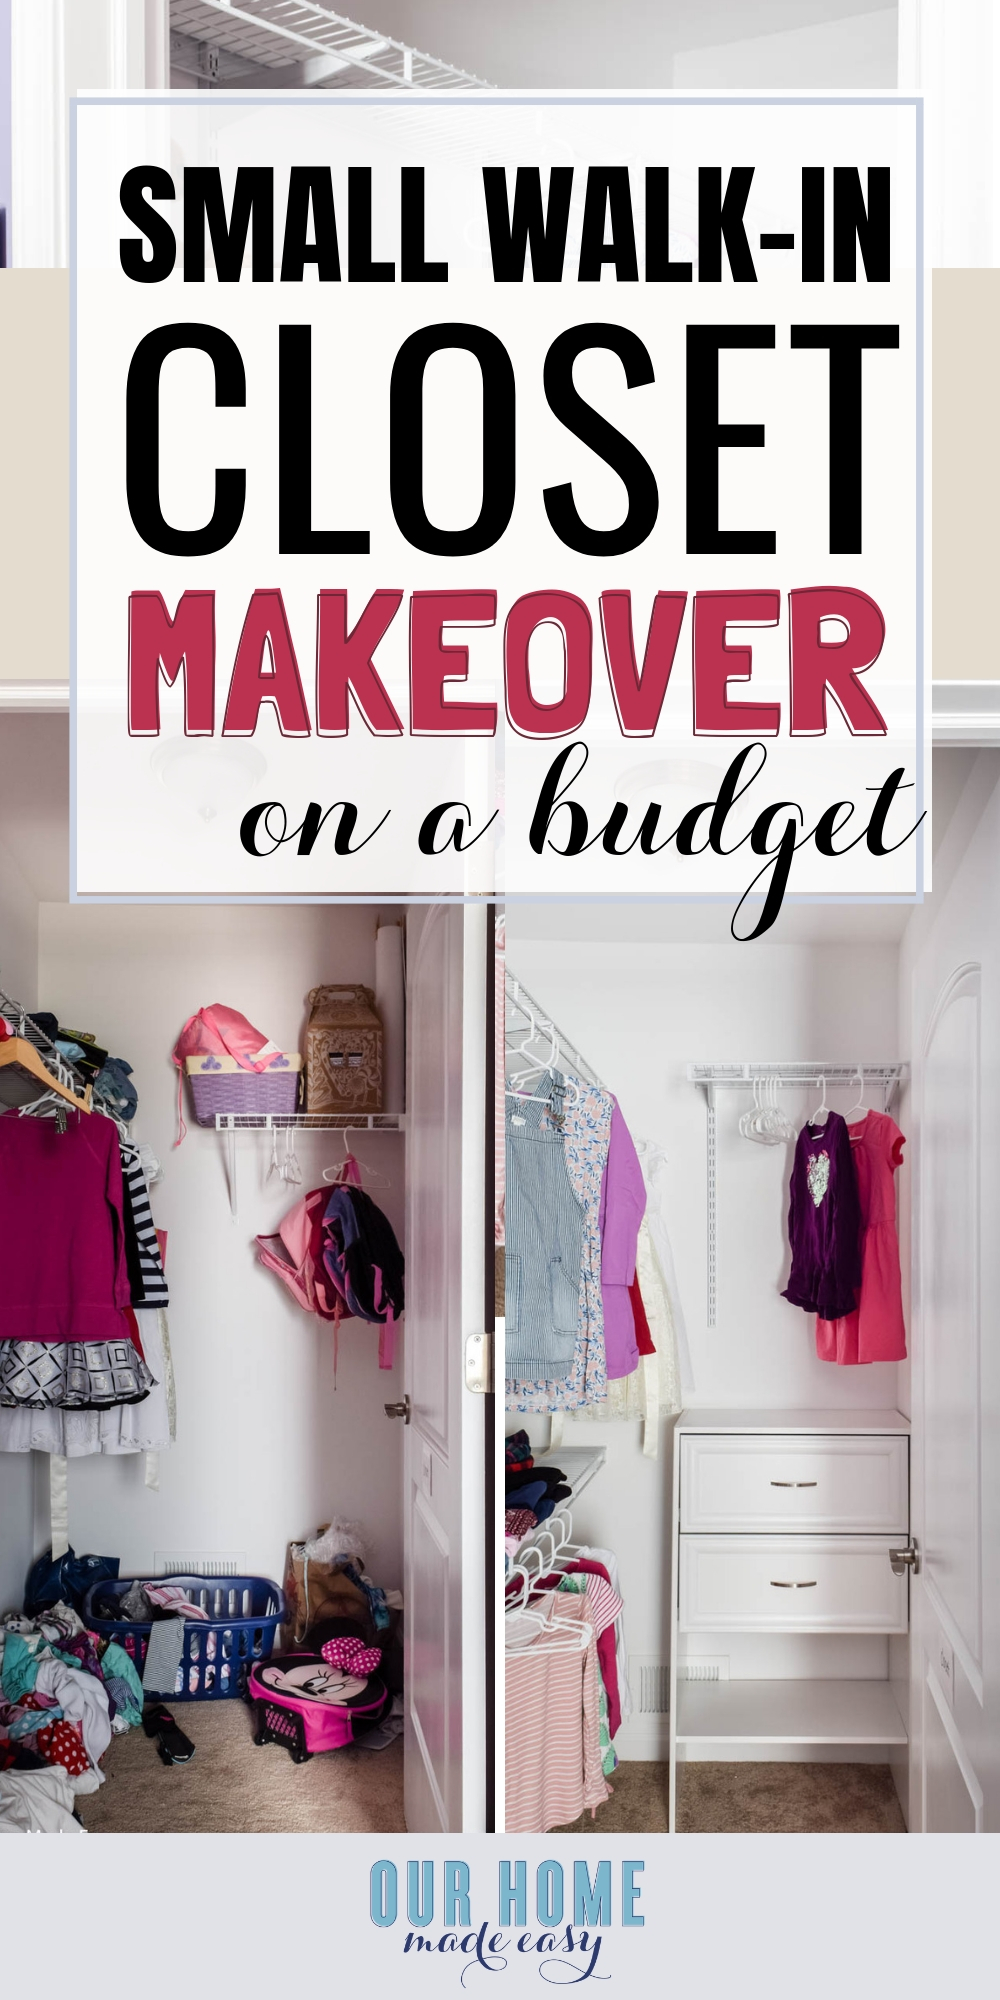 Baby Organization Made Easy: Closet Organizers and More